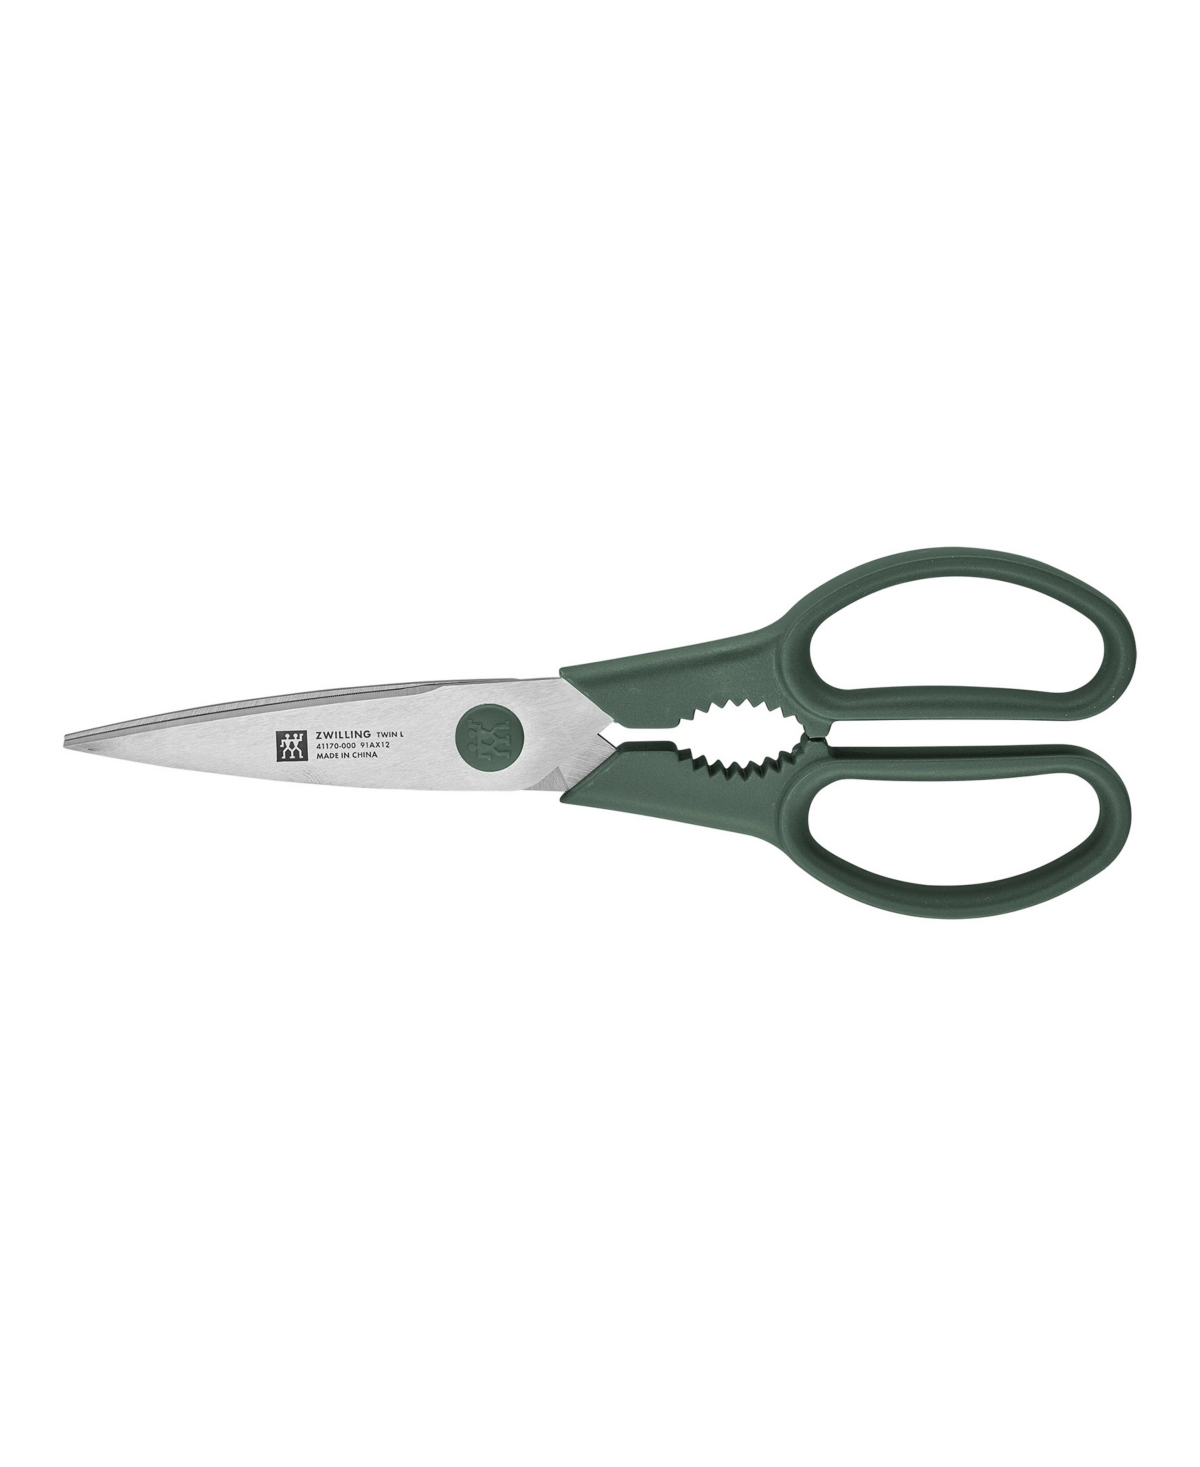 Zwilling Now S Kitchen Shears In Green